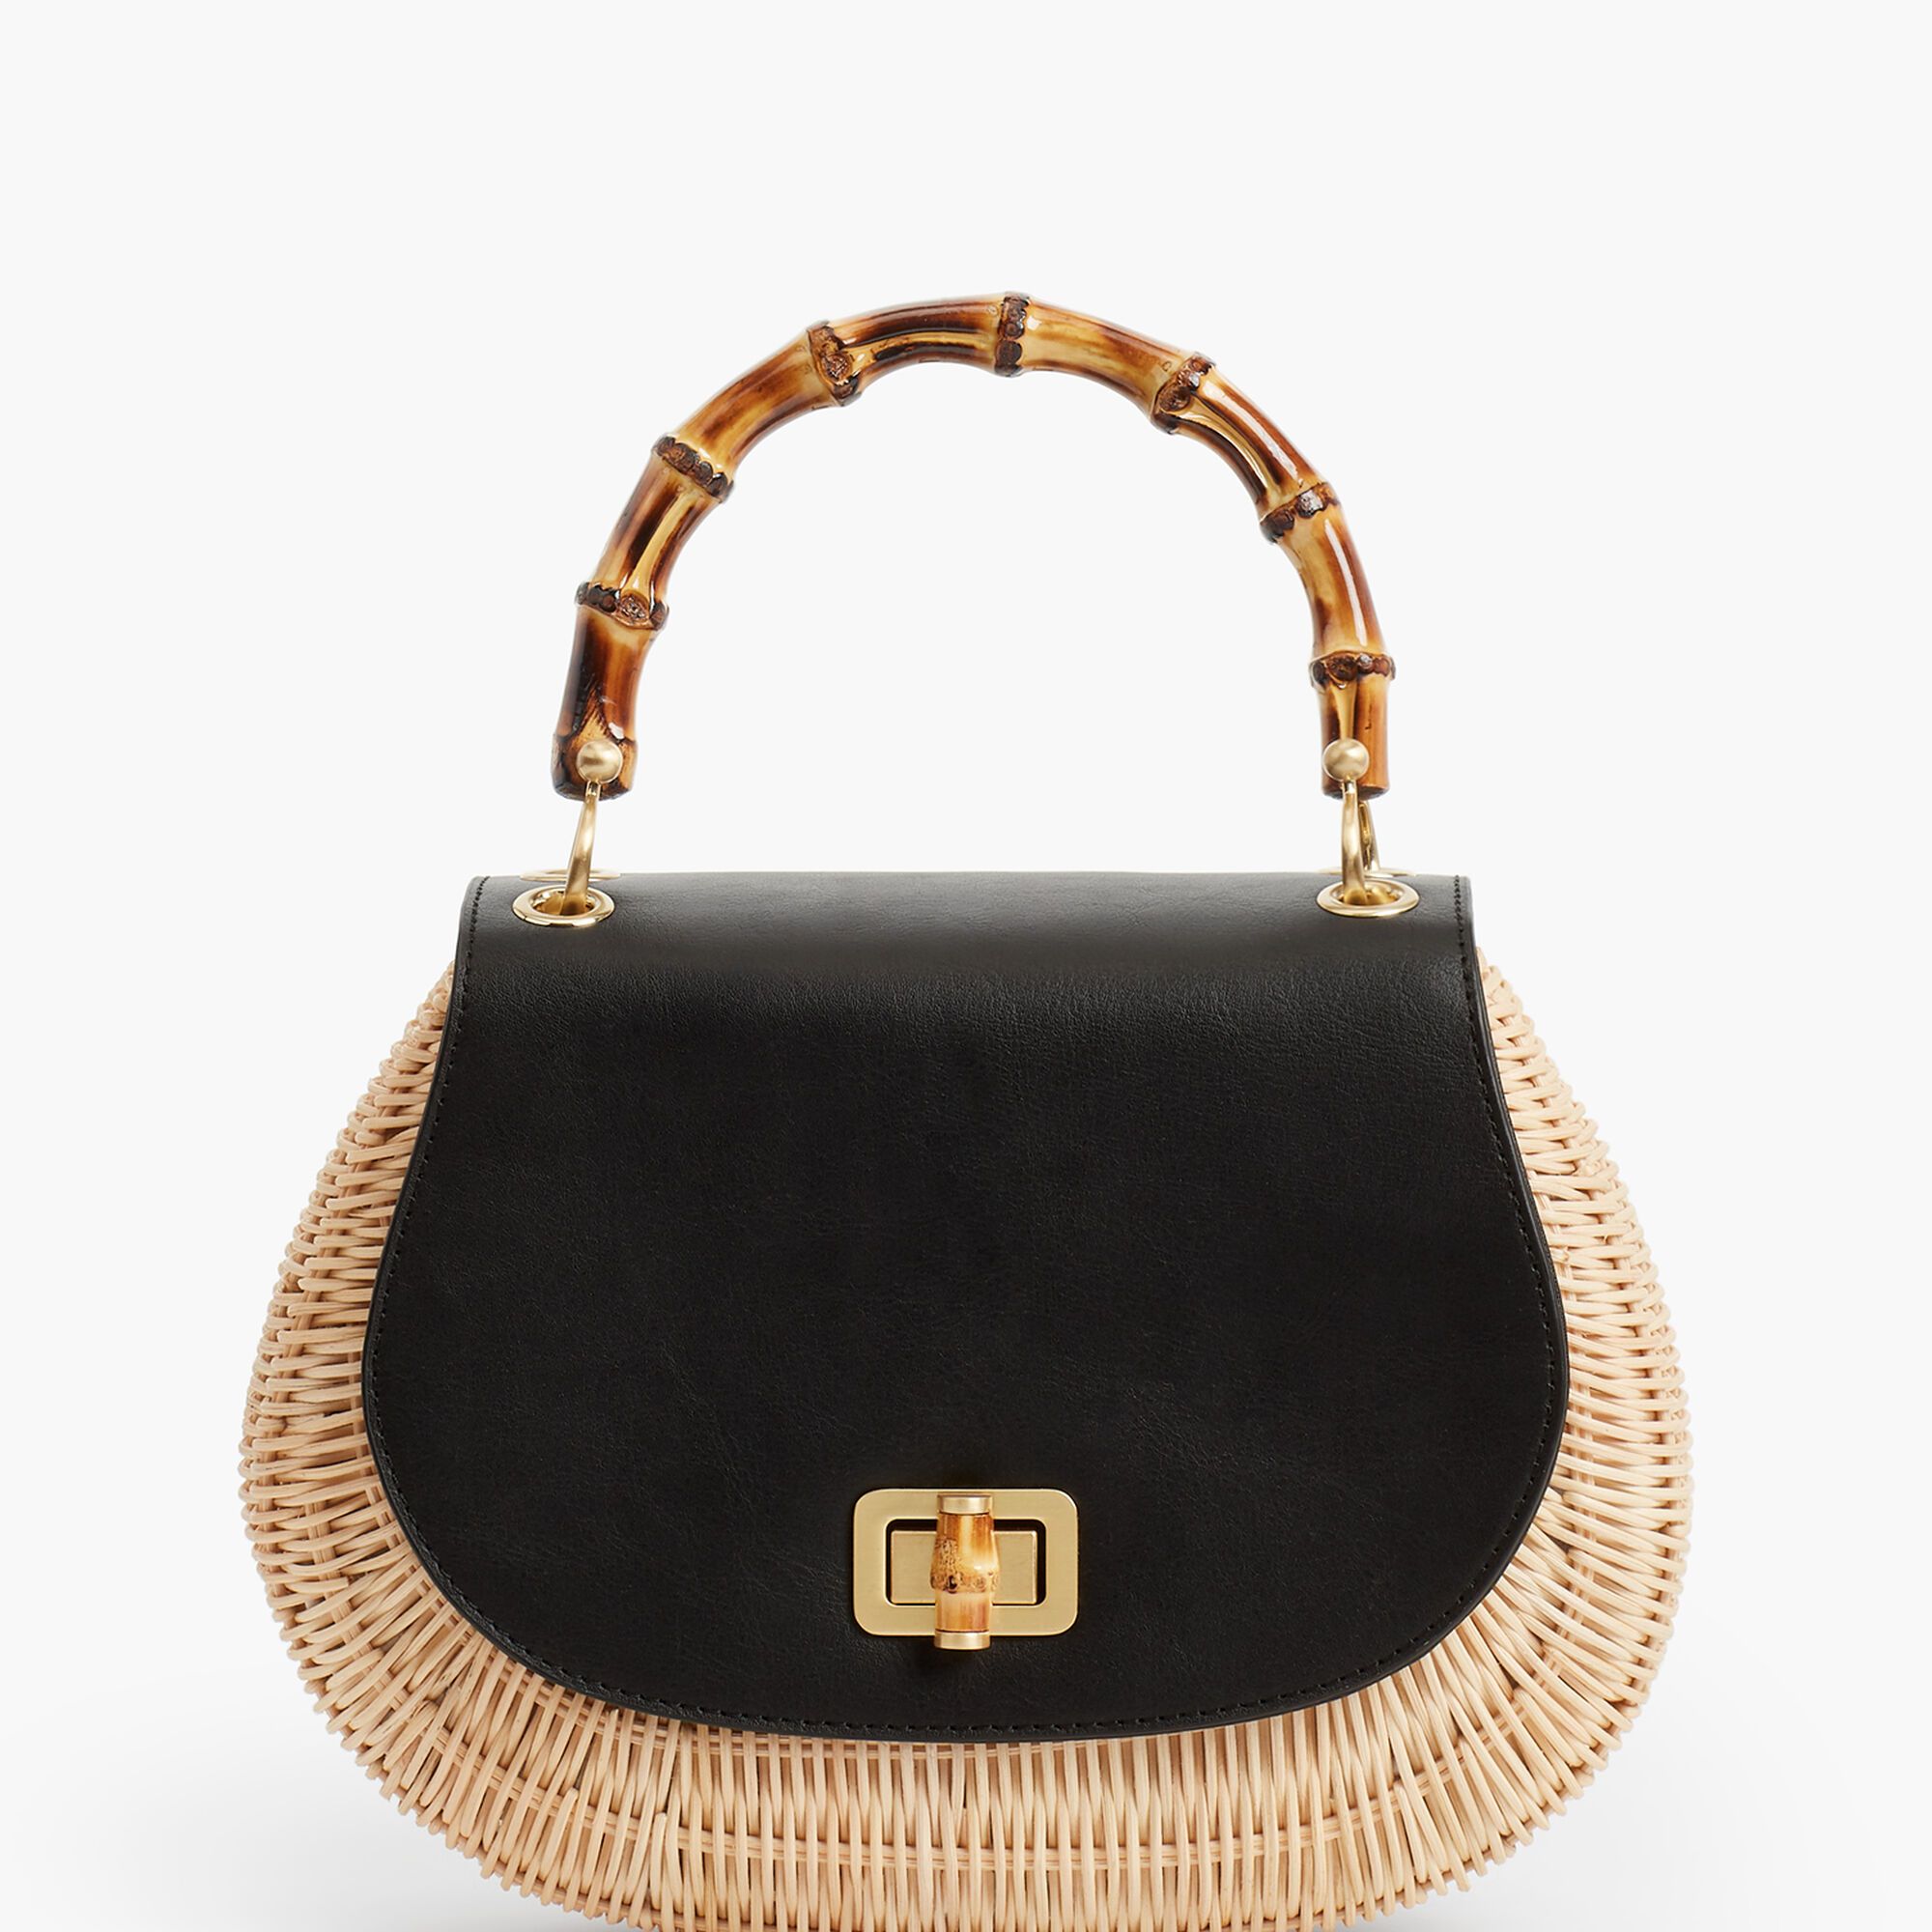 Bamboo-Handle Bag - Leather & Wicker | Talbots